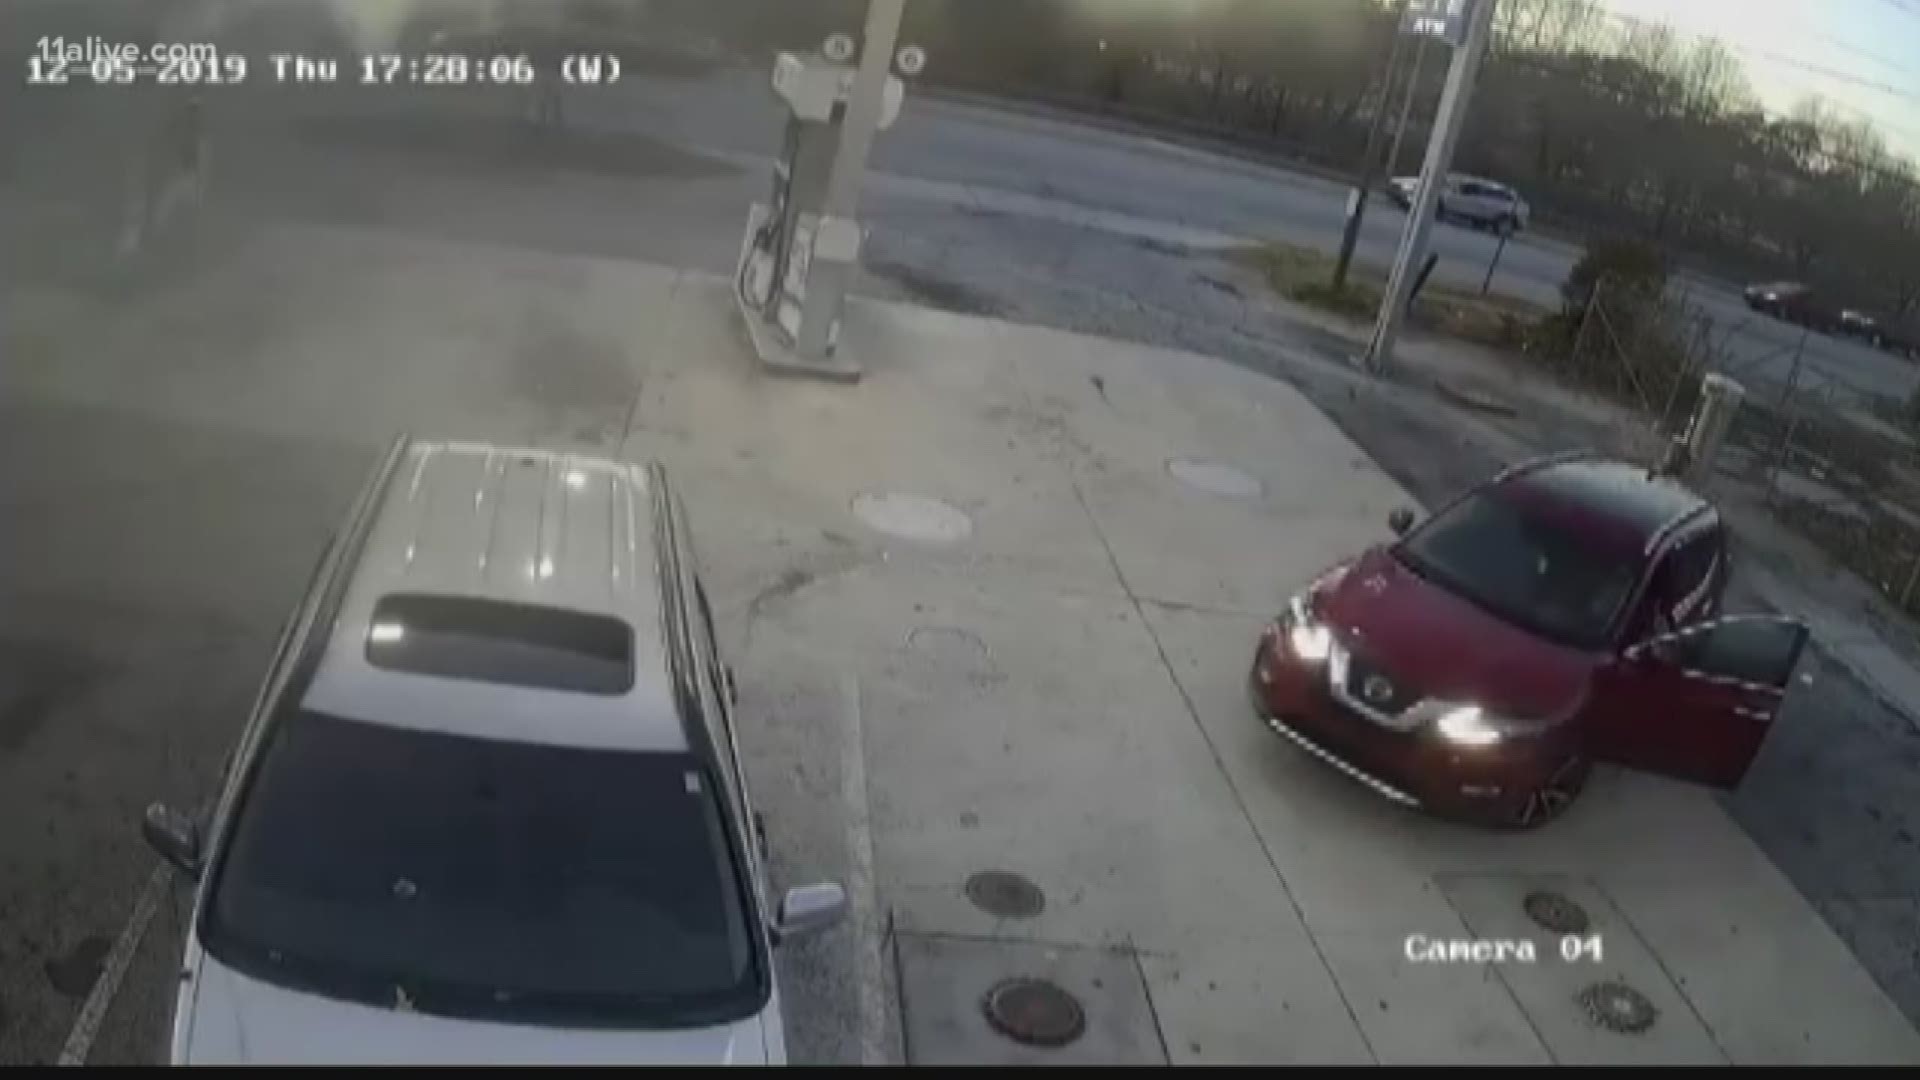 DeKalb County Police have released video showing the violent carjacking of an elderly woman whose dog is now missing as a result.